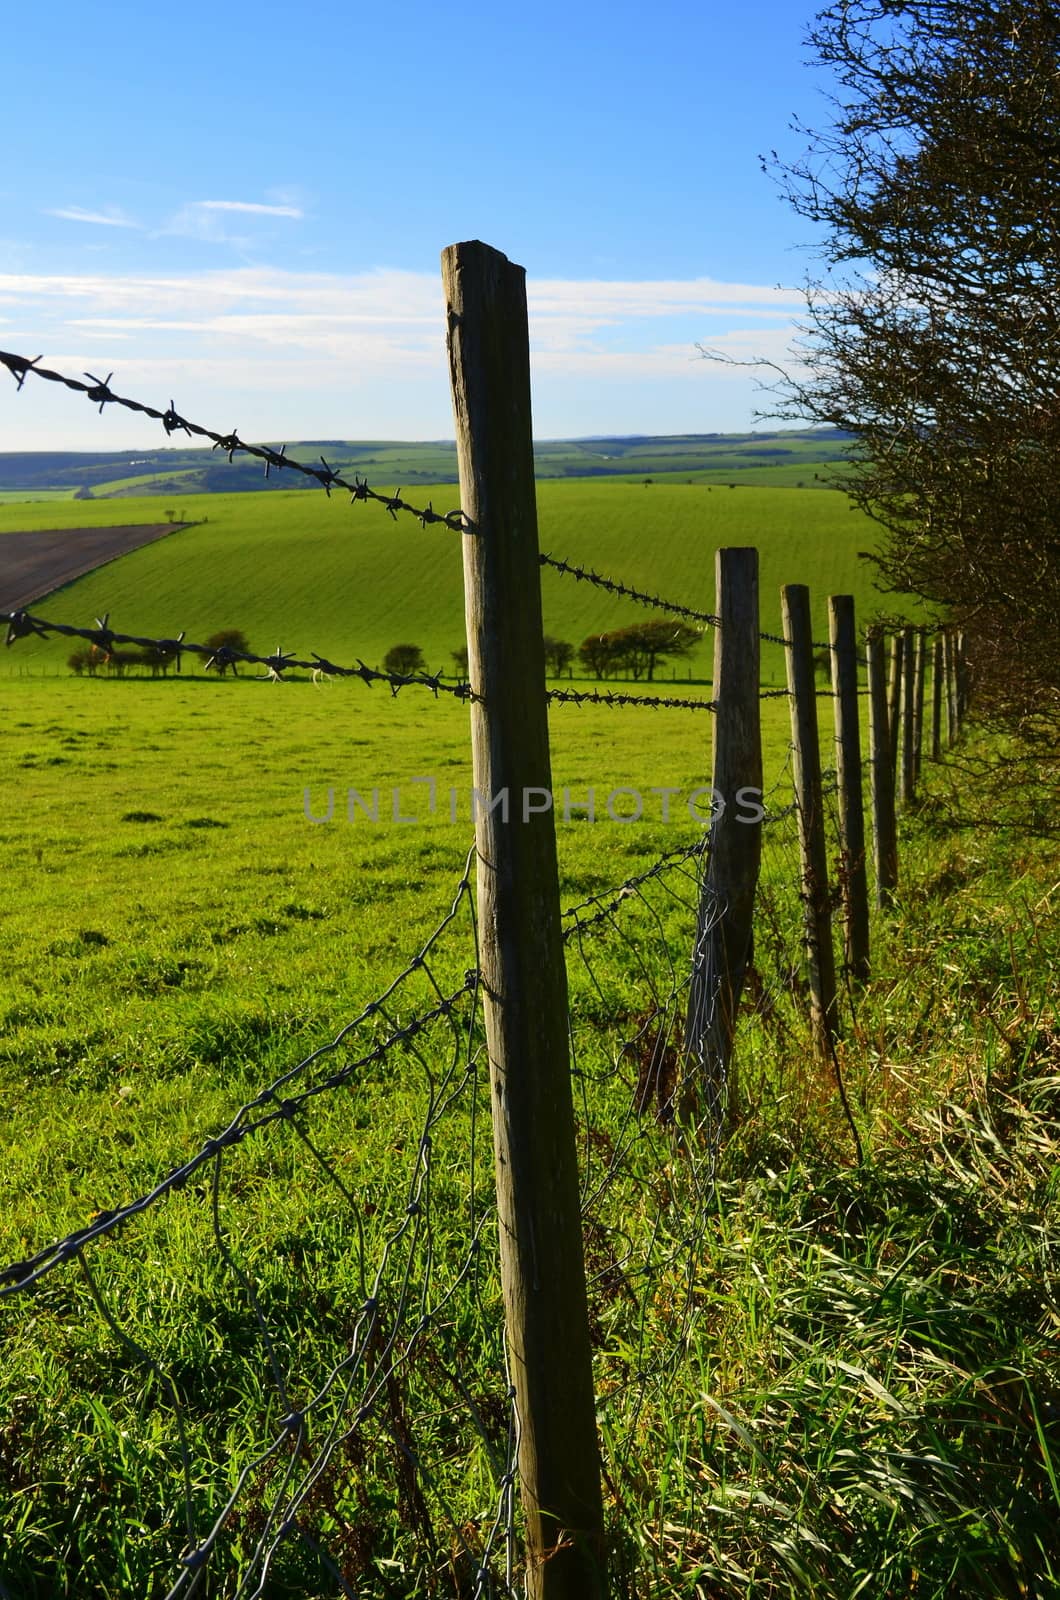 Barbed wire fencing running along pasture fields on the South Downs,Sussex,England.Image taken in November 2013.